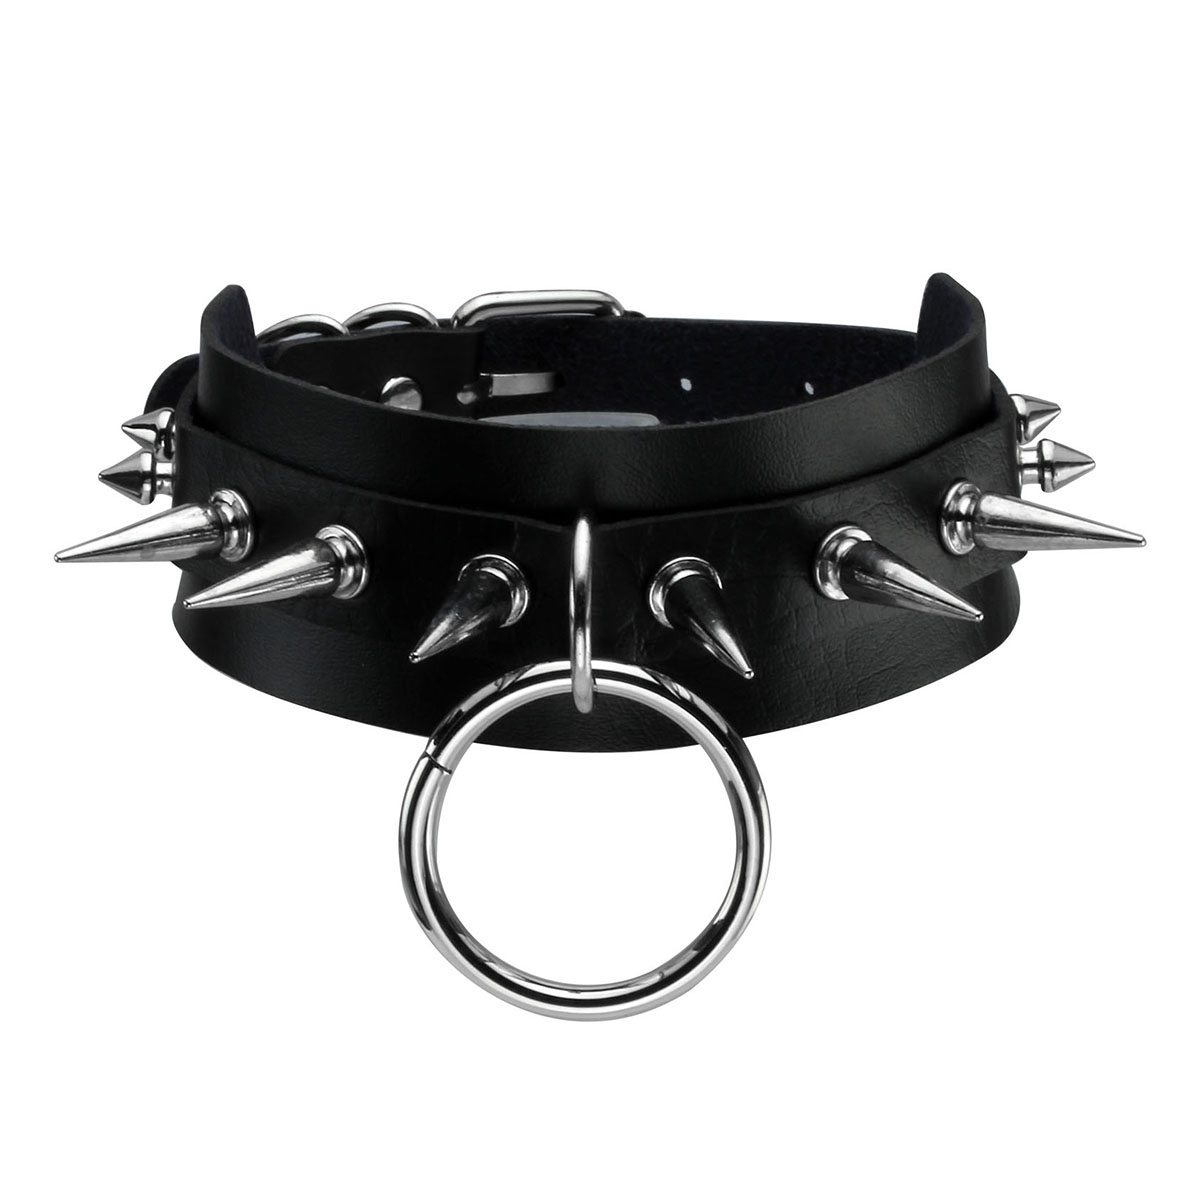 Punk gothic faux leather collar spiked reivets choker necklace with chains